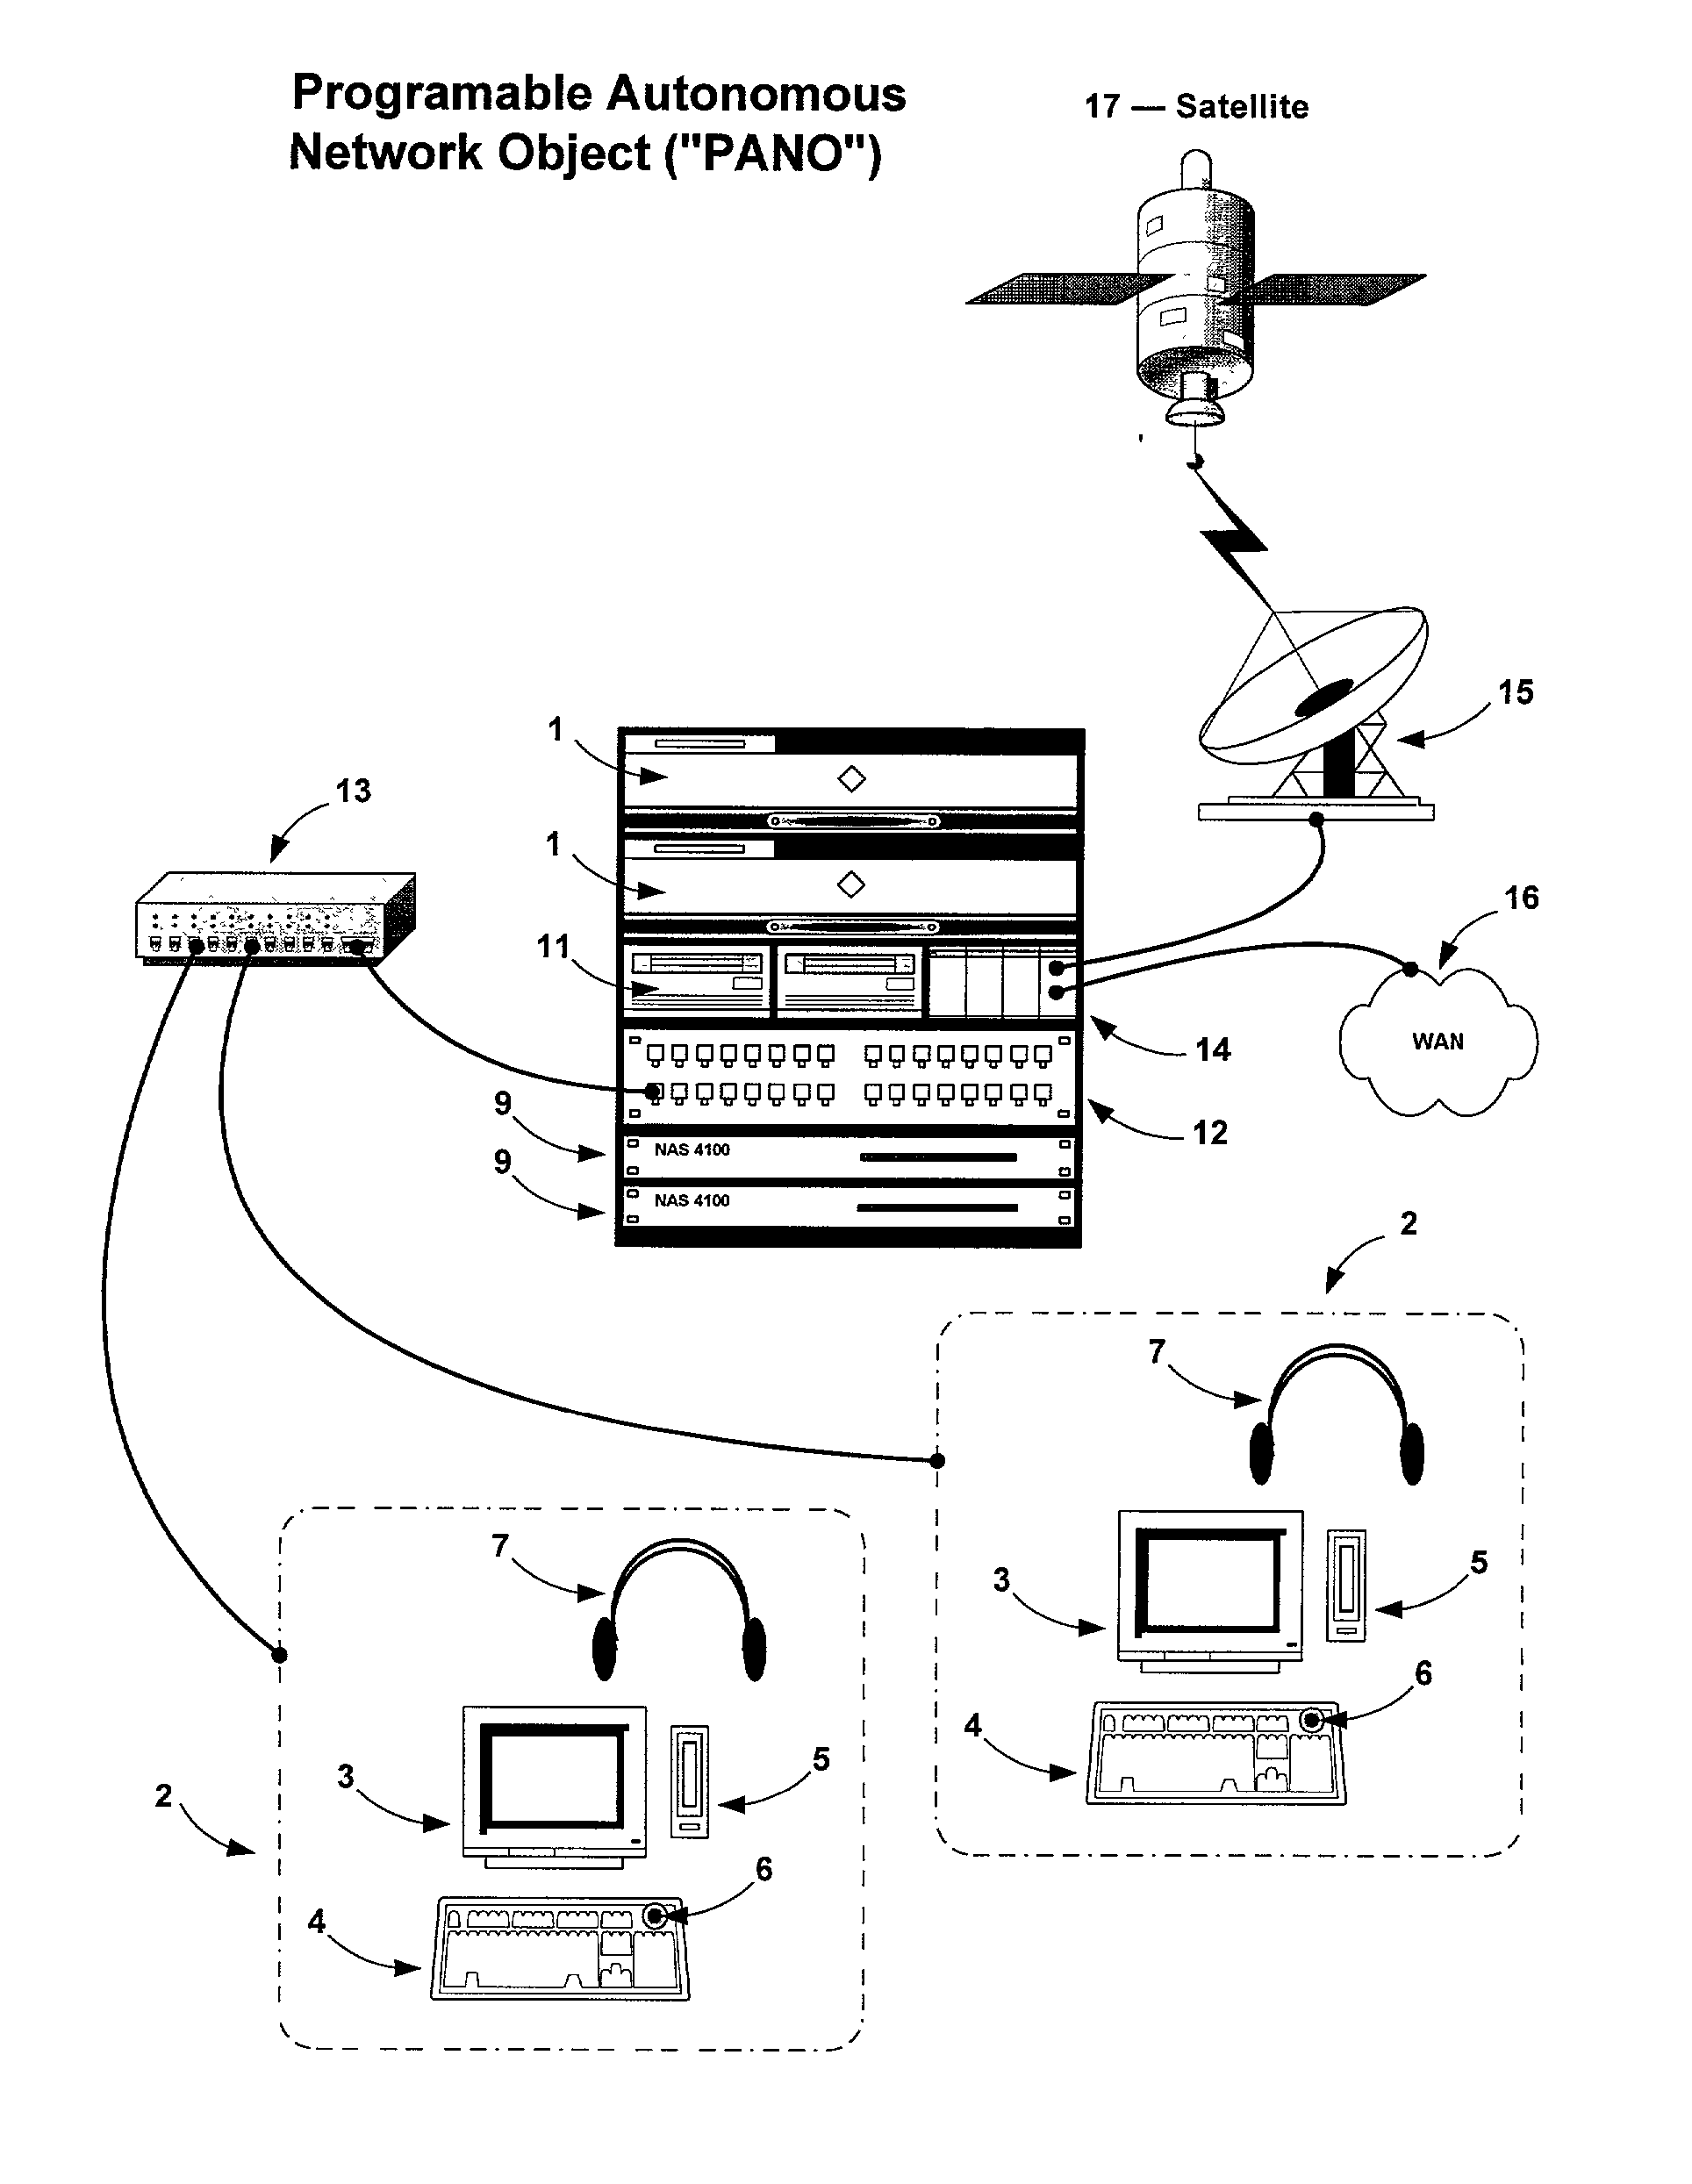 System and method for using programable autonomous network objects to store and deliver content to globally distributed groups of transient users